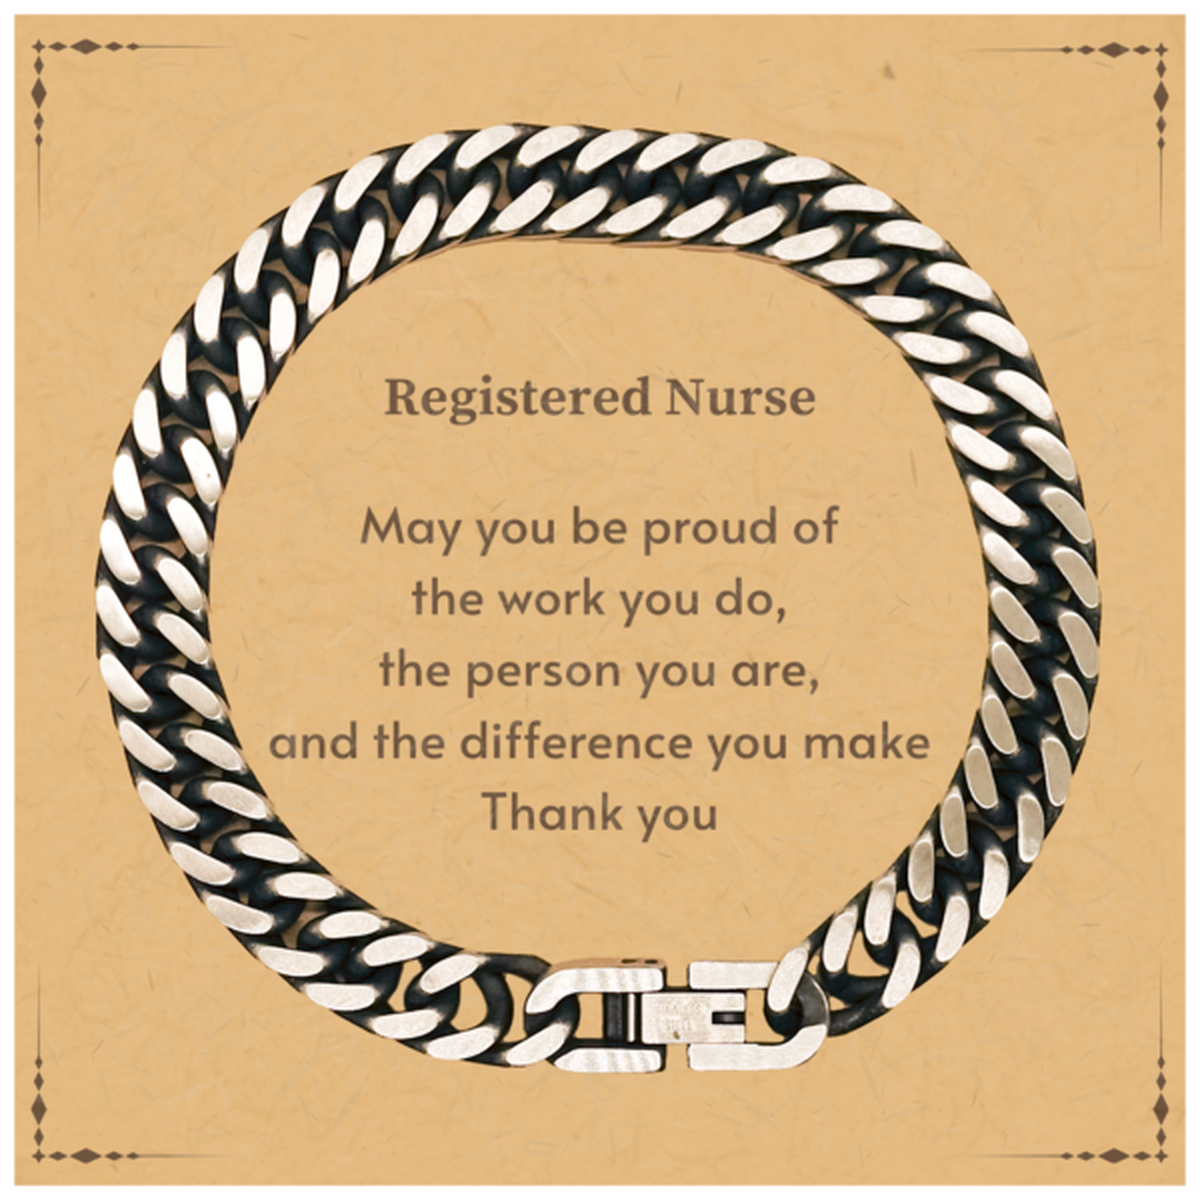 Heartwarming Cuban Link Chain Bracelet Retirement Coworkers Gifts for Registered Nurse, Registered Nurse May You be proud of the work you do, the person you are Gifts for Boss Men Women Friends